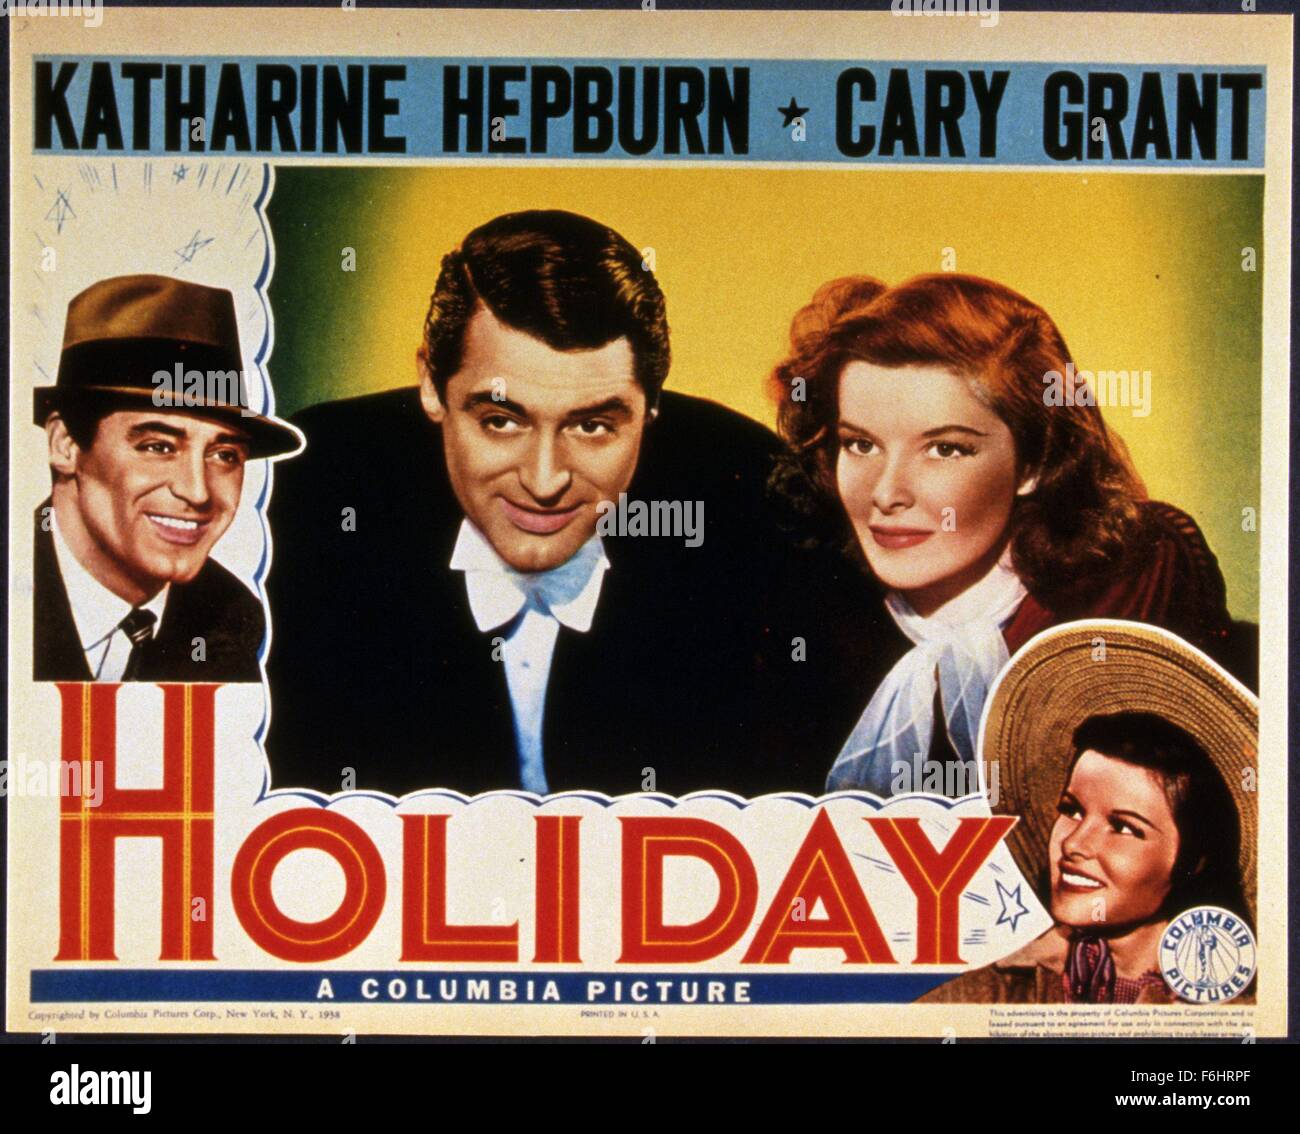 1938, Film Title: HOLIDAY, Director: GEORGE CUKOR, Studio: COLUMBIA, Pictured: 1938, LOBBY CARD, CARY GRANT. (Credit Image: SNAP) Stock Photo